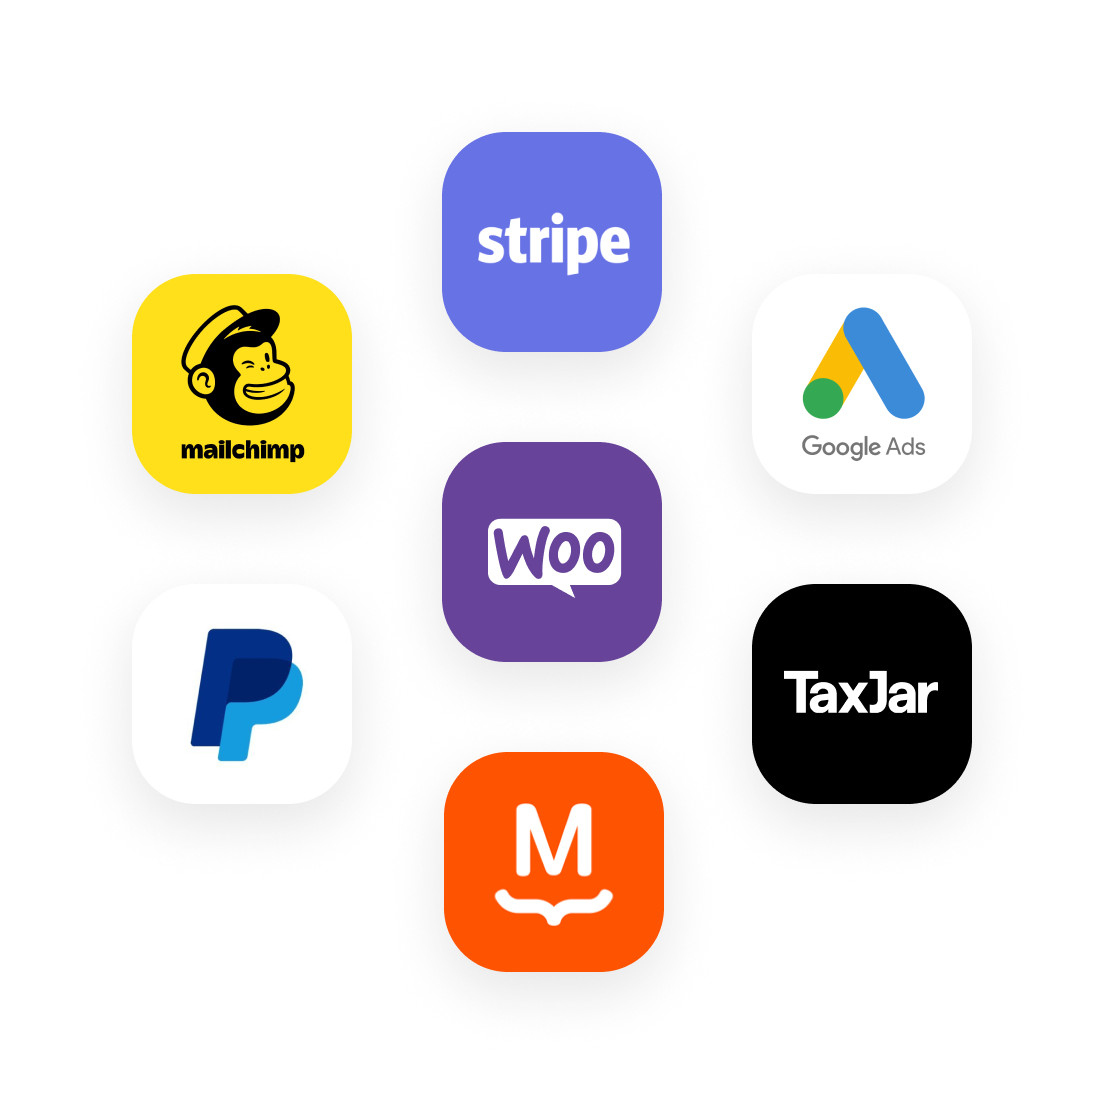 Logos for a selection of products compatible with WooCommerce: Stripe, Google Ads, TaxJar, MailChimp, PayPal, and MailPoet.